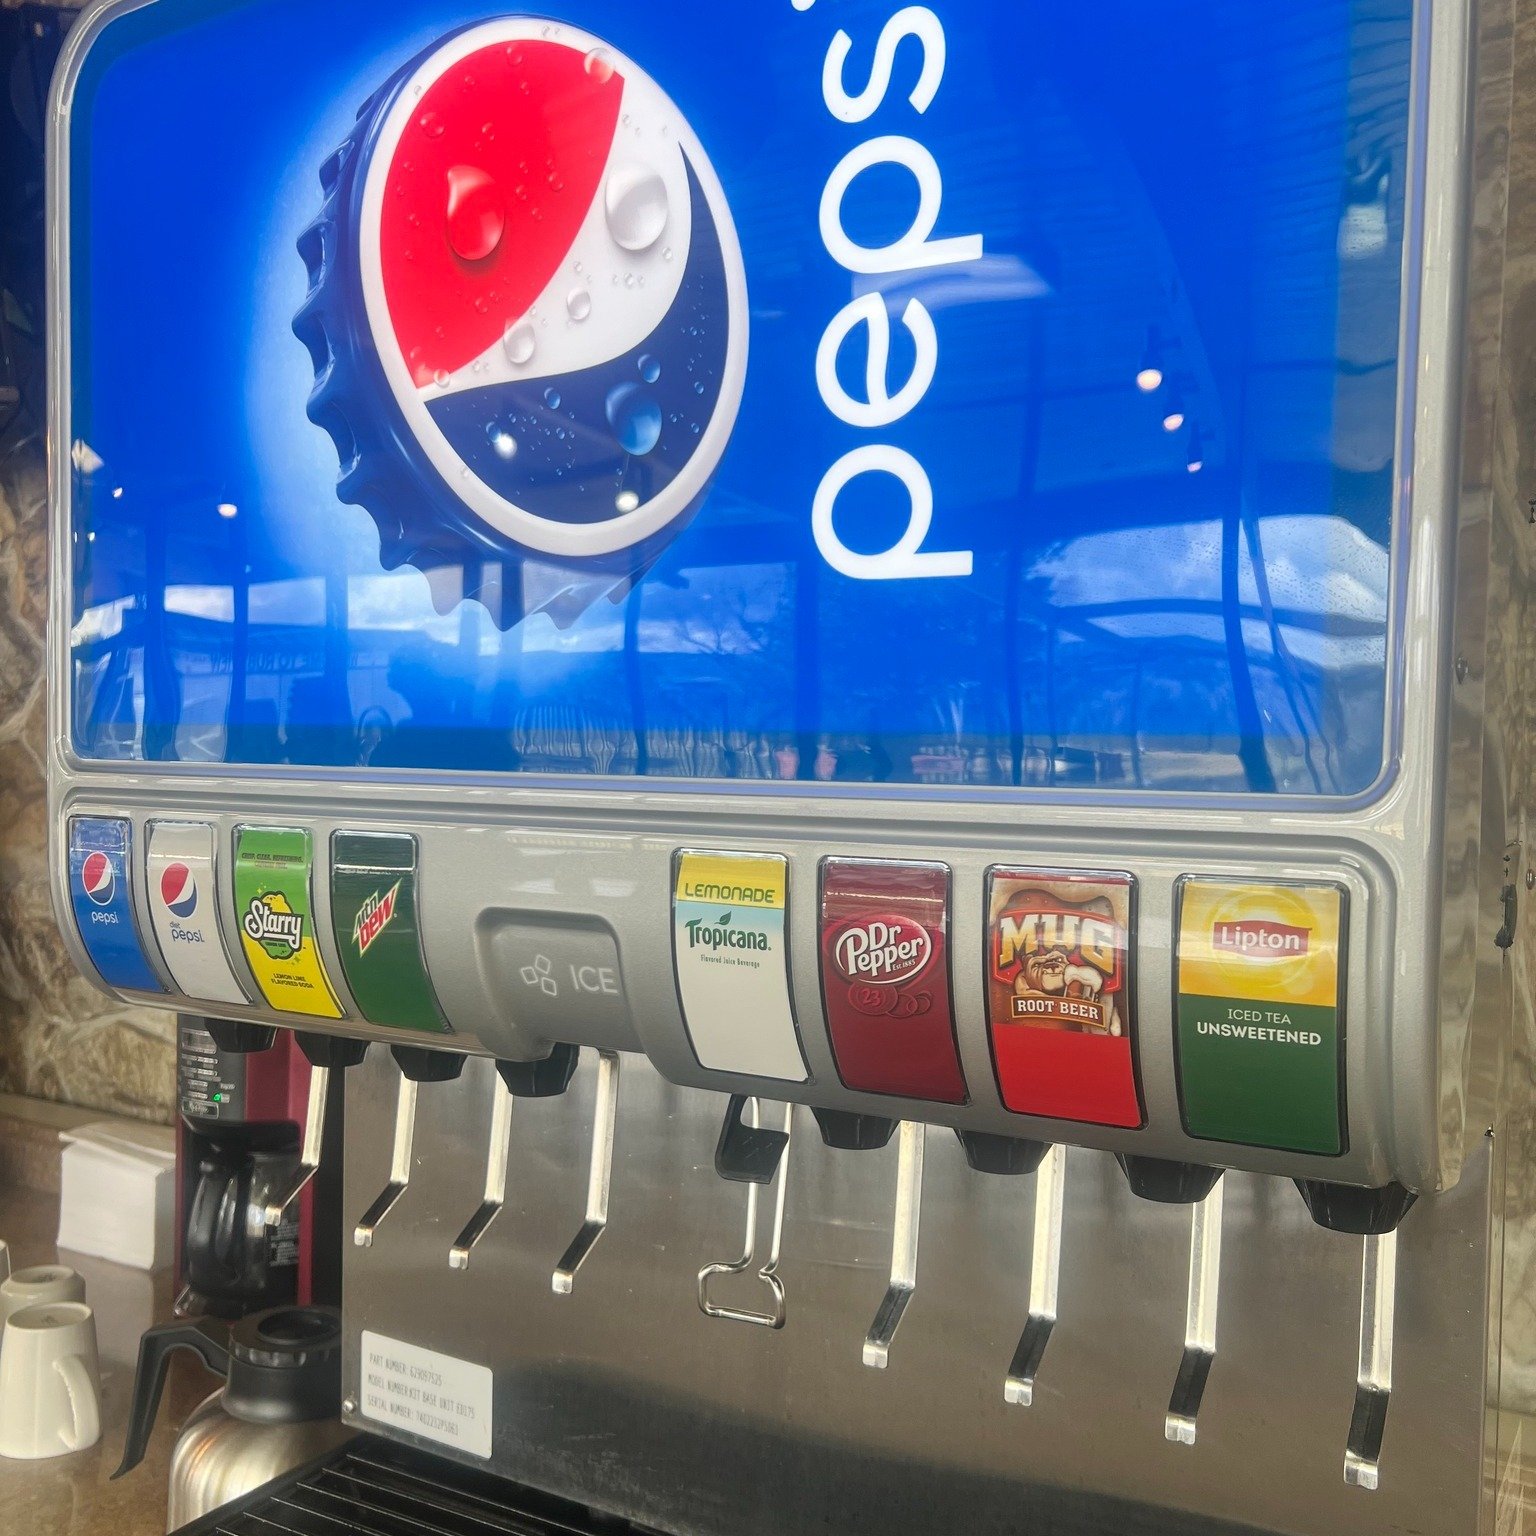 Keep cool with every cup! 🥤🏌️&zwj;♂️ Whether you&rsquo;re just starting your round or finishing up on the 18th, our soda fountain is the perfect pit stop to refresh and recharge.

📍 2100 Ruby View Dr, Elko, NV 89801

#rubyviewgolfclub #elkogolf #K